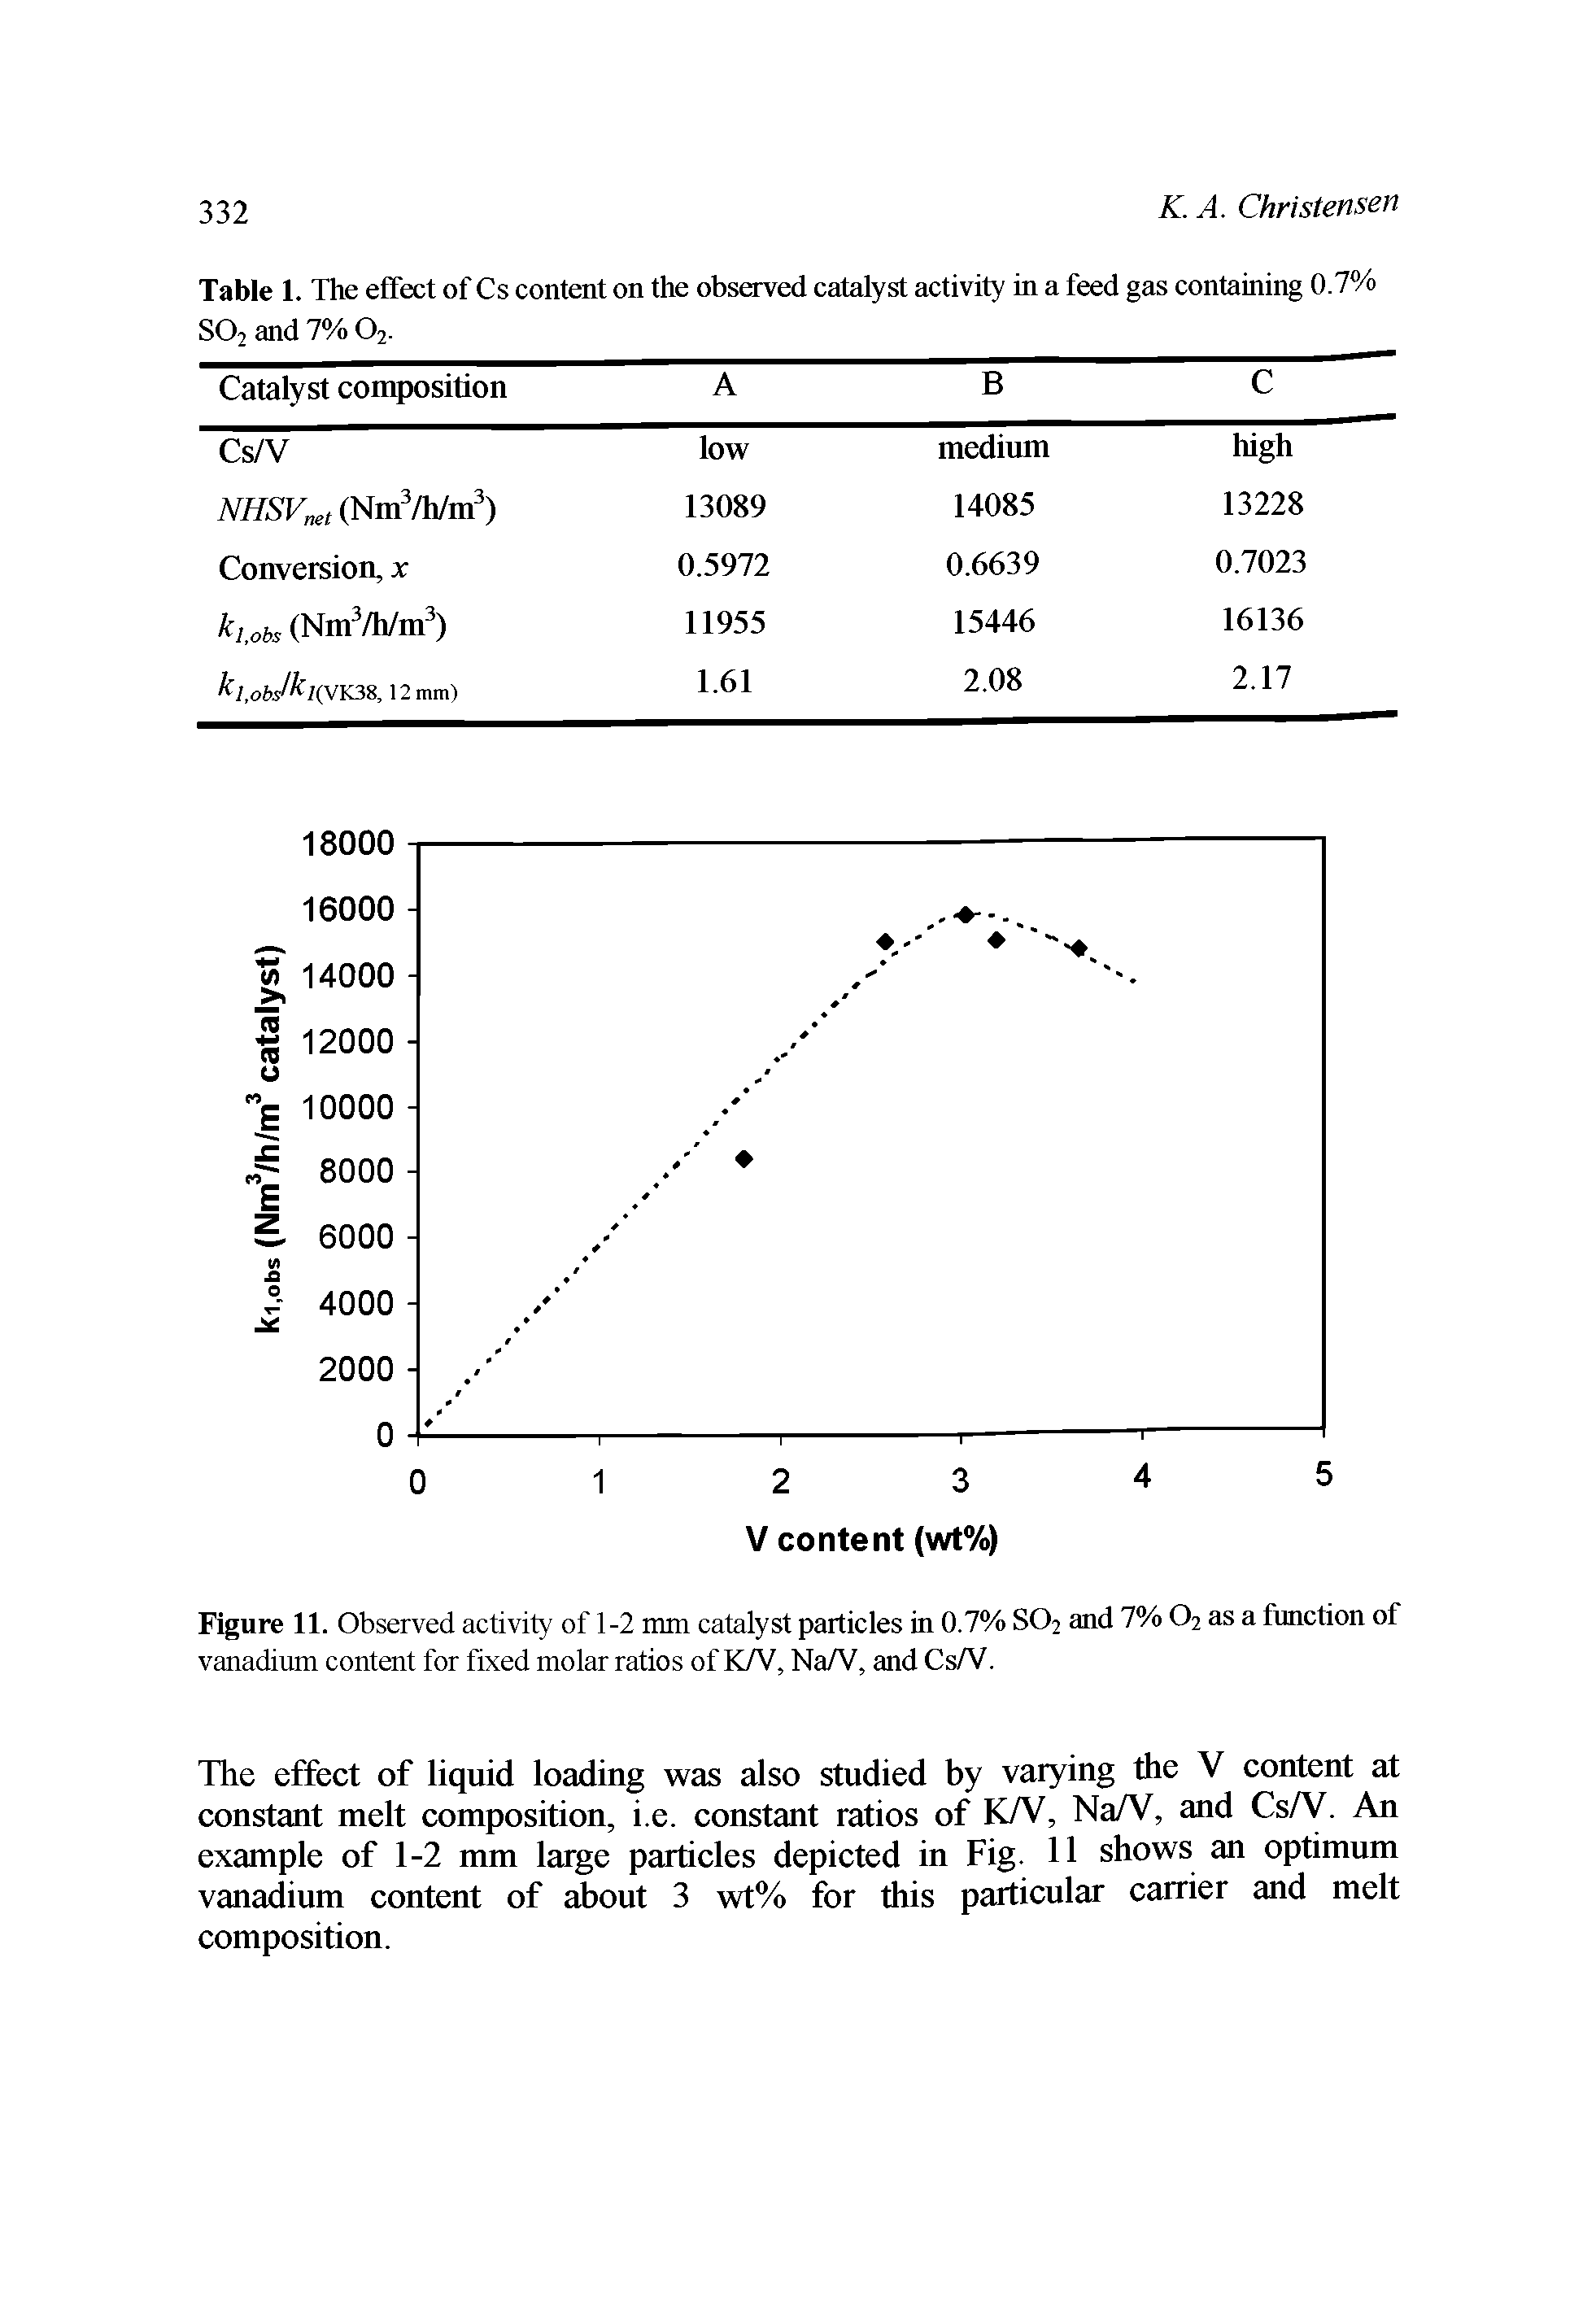 Figure 11. Observed activity of 1-2 mm catalyst particles in 0.7% S02 and 7% 02 as a function of vanadium content for fixed molar ratios of K/V, Na/V, and Cs/V.